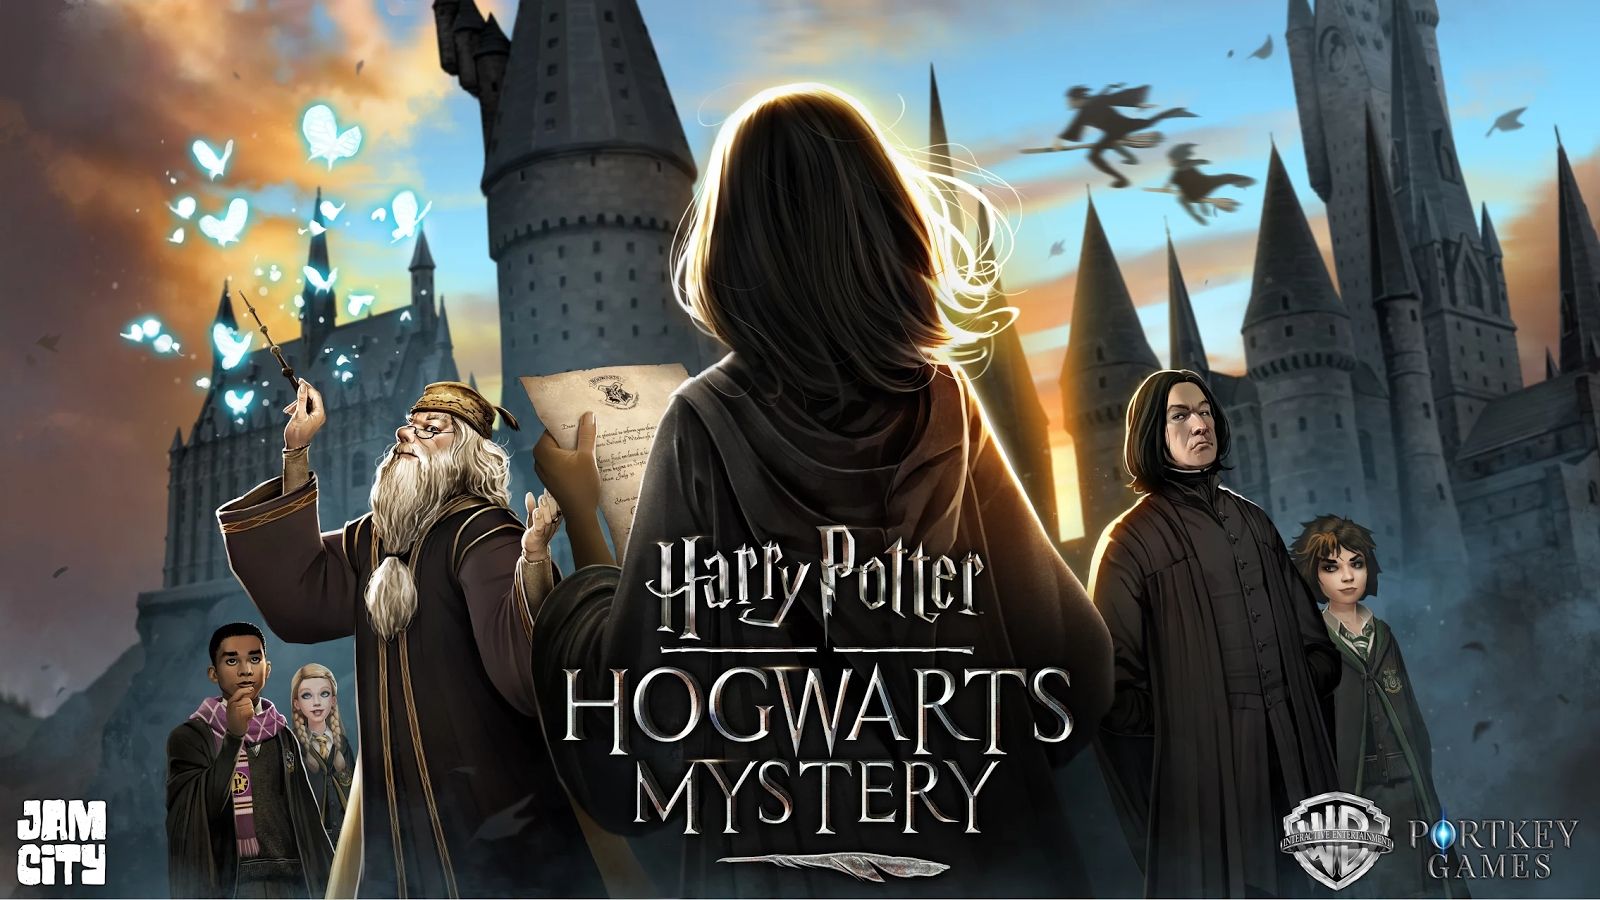 School is Back in Session! Harry Potter: Hogwarts Mystery Launches